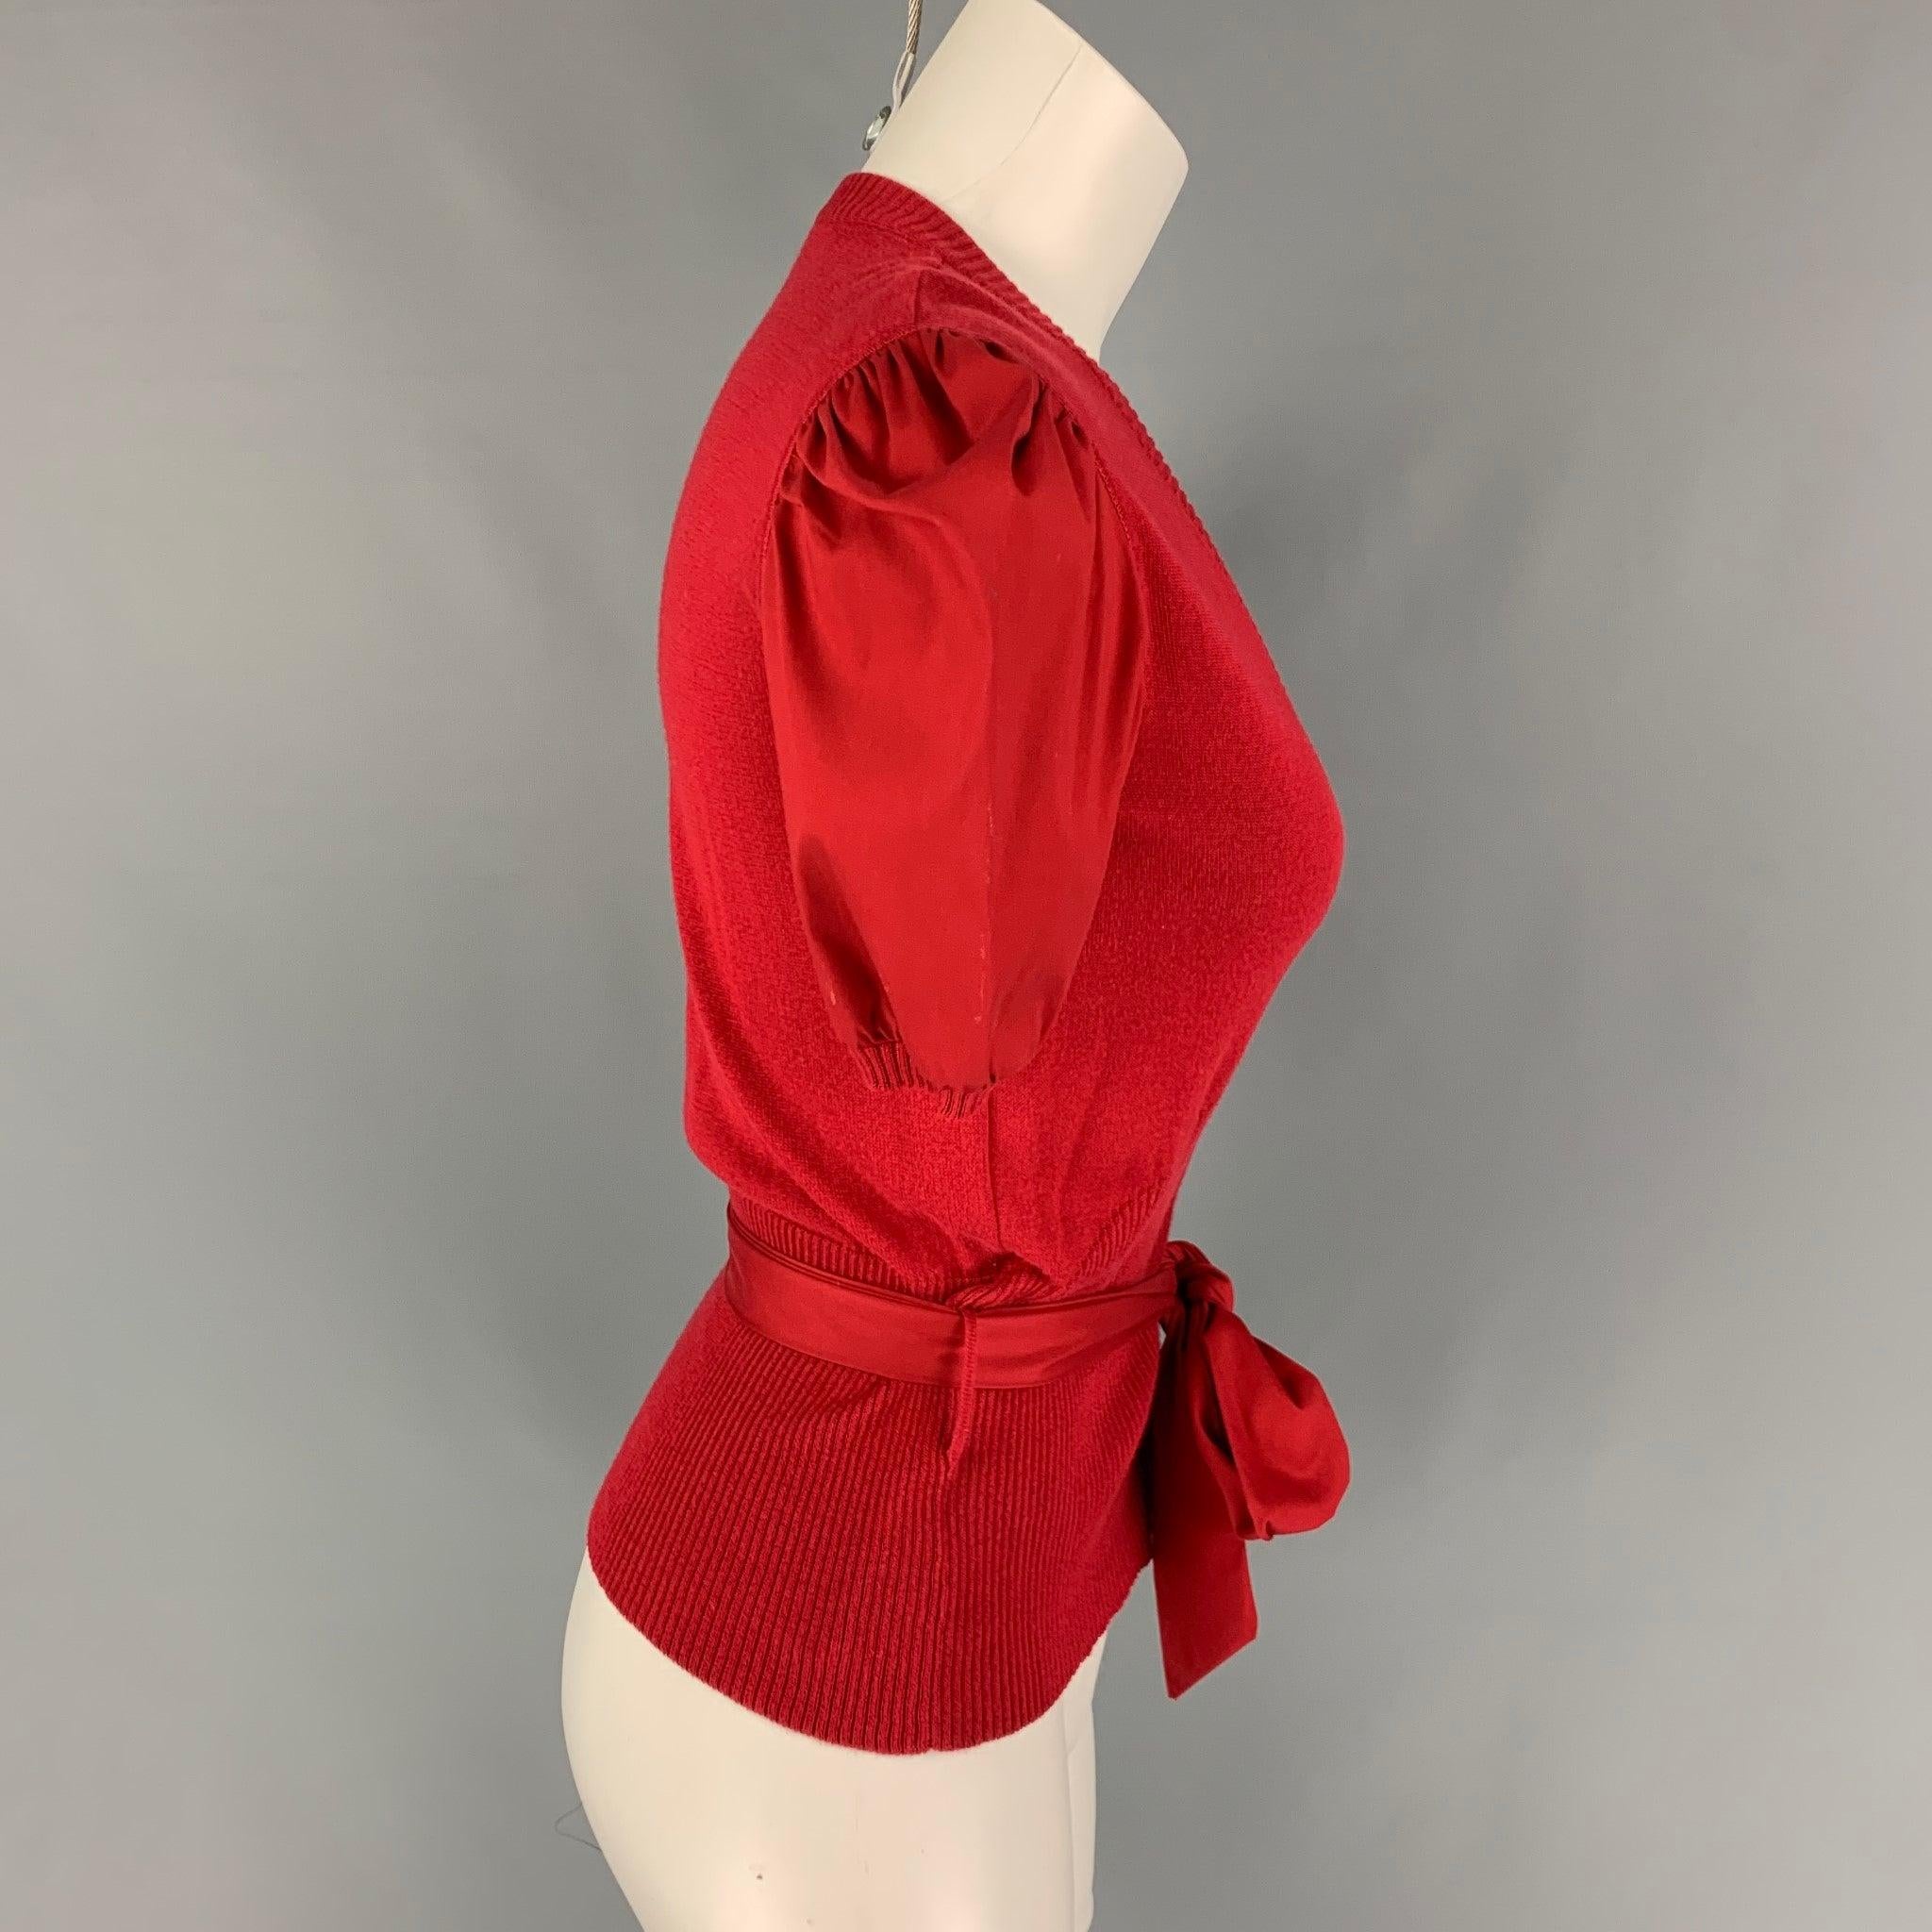 MIU MIU cardigan comes in a red cotton blend featuring short sleeves, self-tie belt, and a buttoned closure. Made in Italy.
Very Good
Pre-Owned Condition. 

Marked:   40 

Measurements: 
 
Shoulder:
15.5 inches  Bust: 32 inches Sleeve: 10.5 inches 